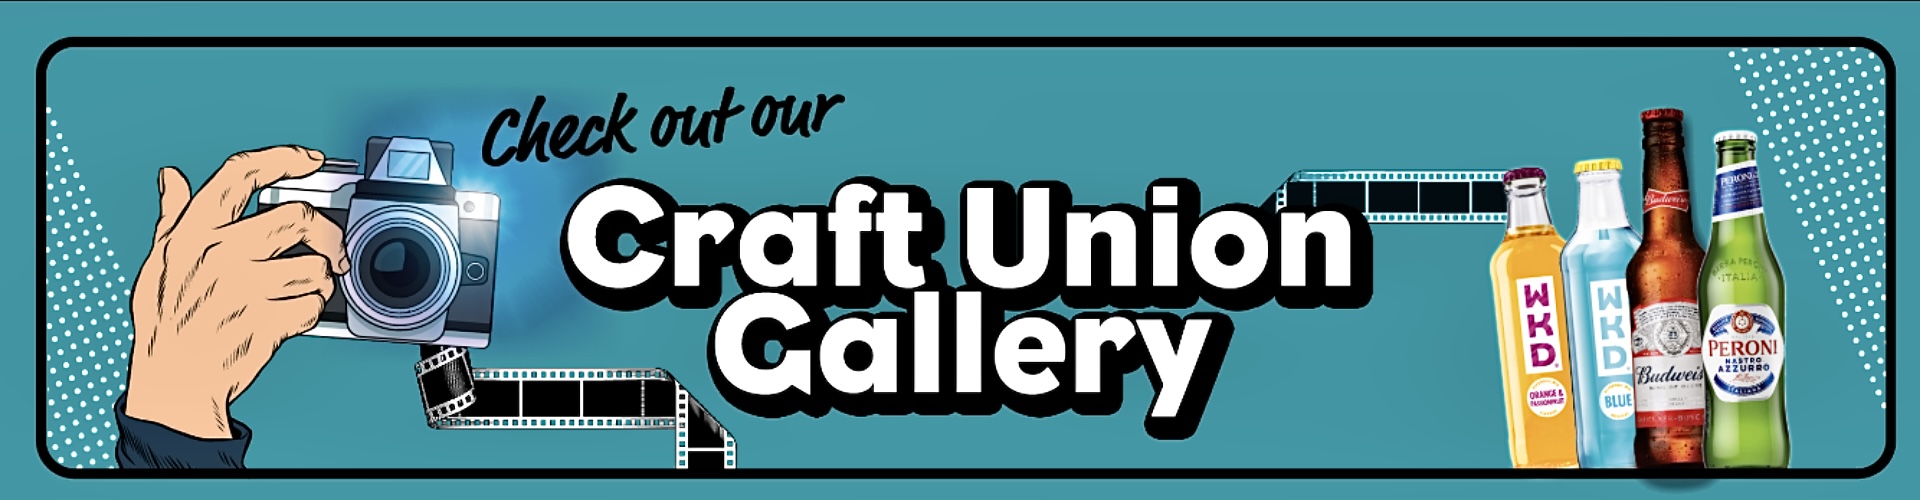 Check Out Our Craft Union Gallery